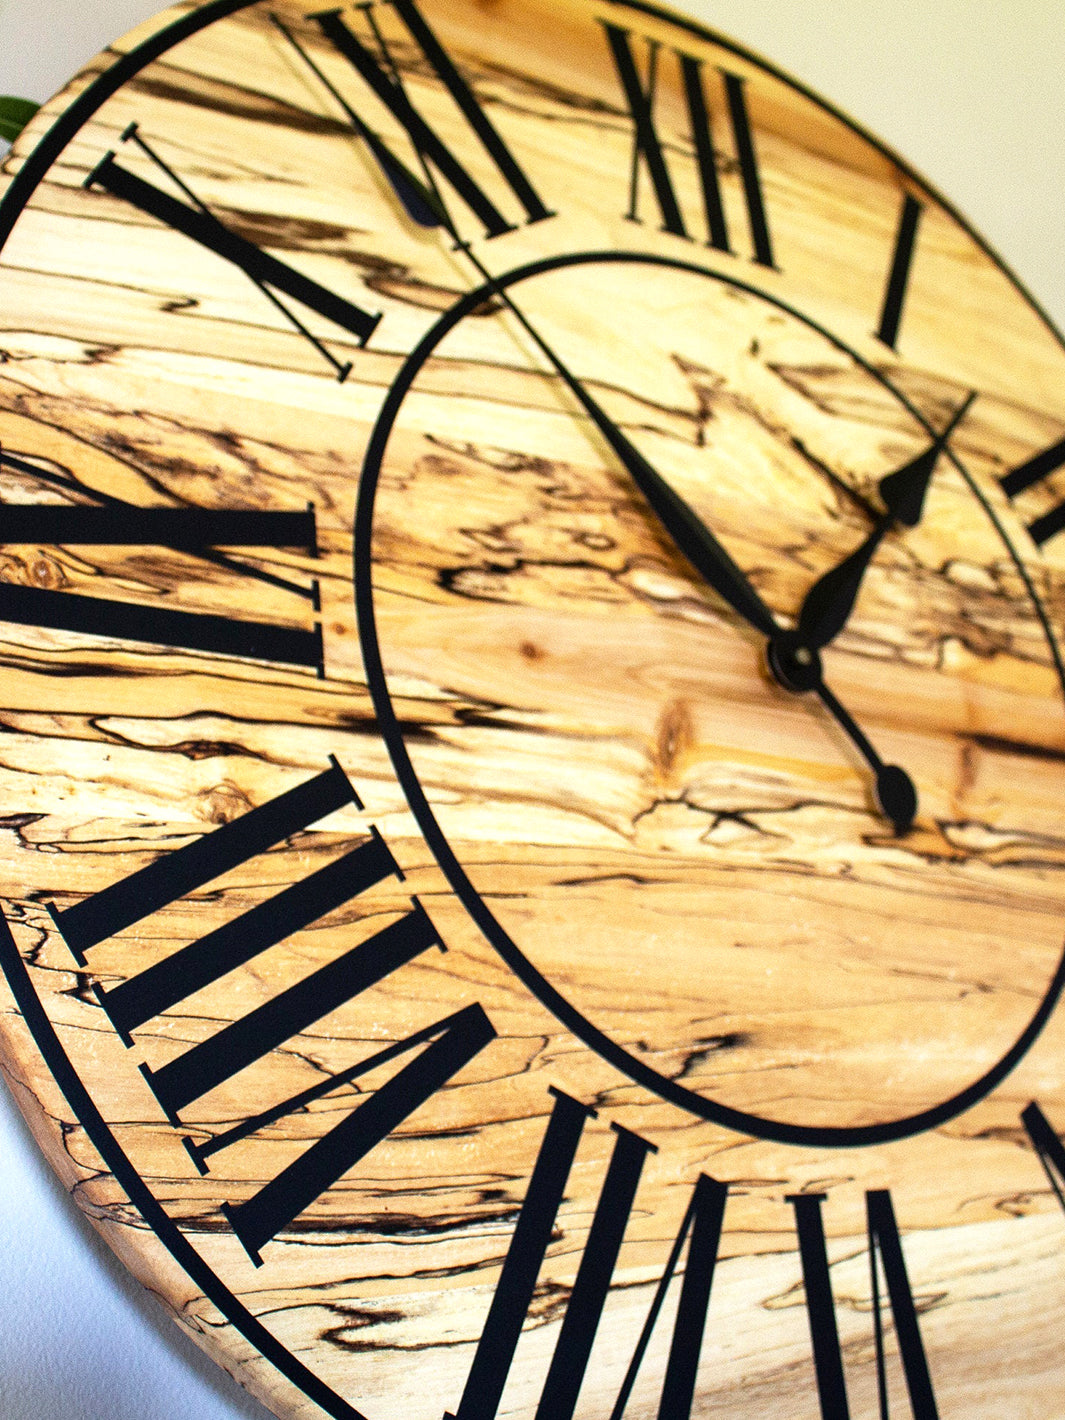 Solid Spalted Maple Wall Clock with Black Lines and Roman Numerals Earthly Comfort Clocks 547-2